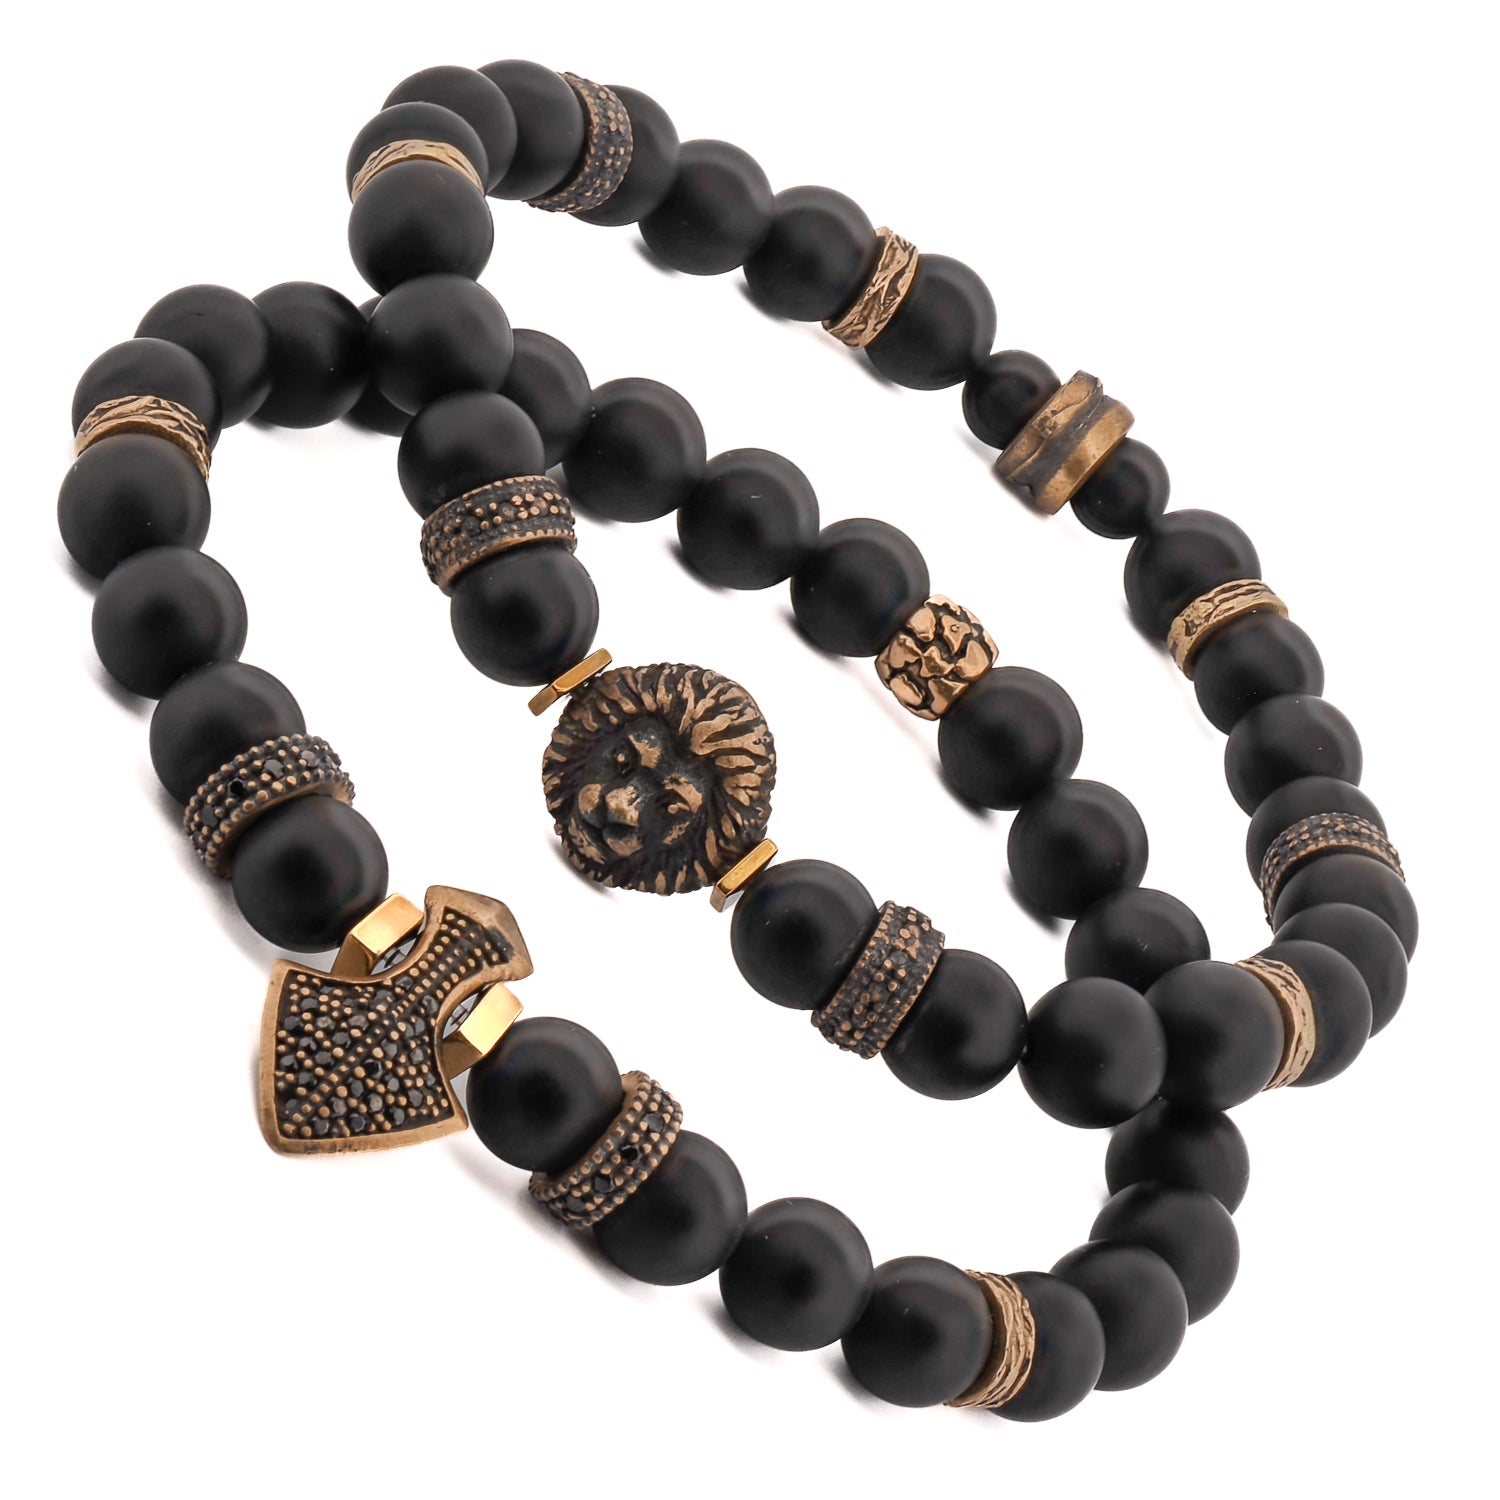 Handcrafted Lion & Diamond Arrow Black Onyx Bracelet Set with black onyx beads and bronze accents, designed for strength and stability